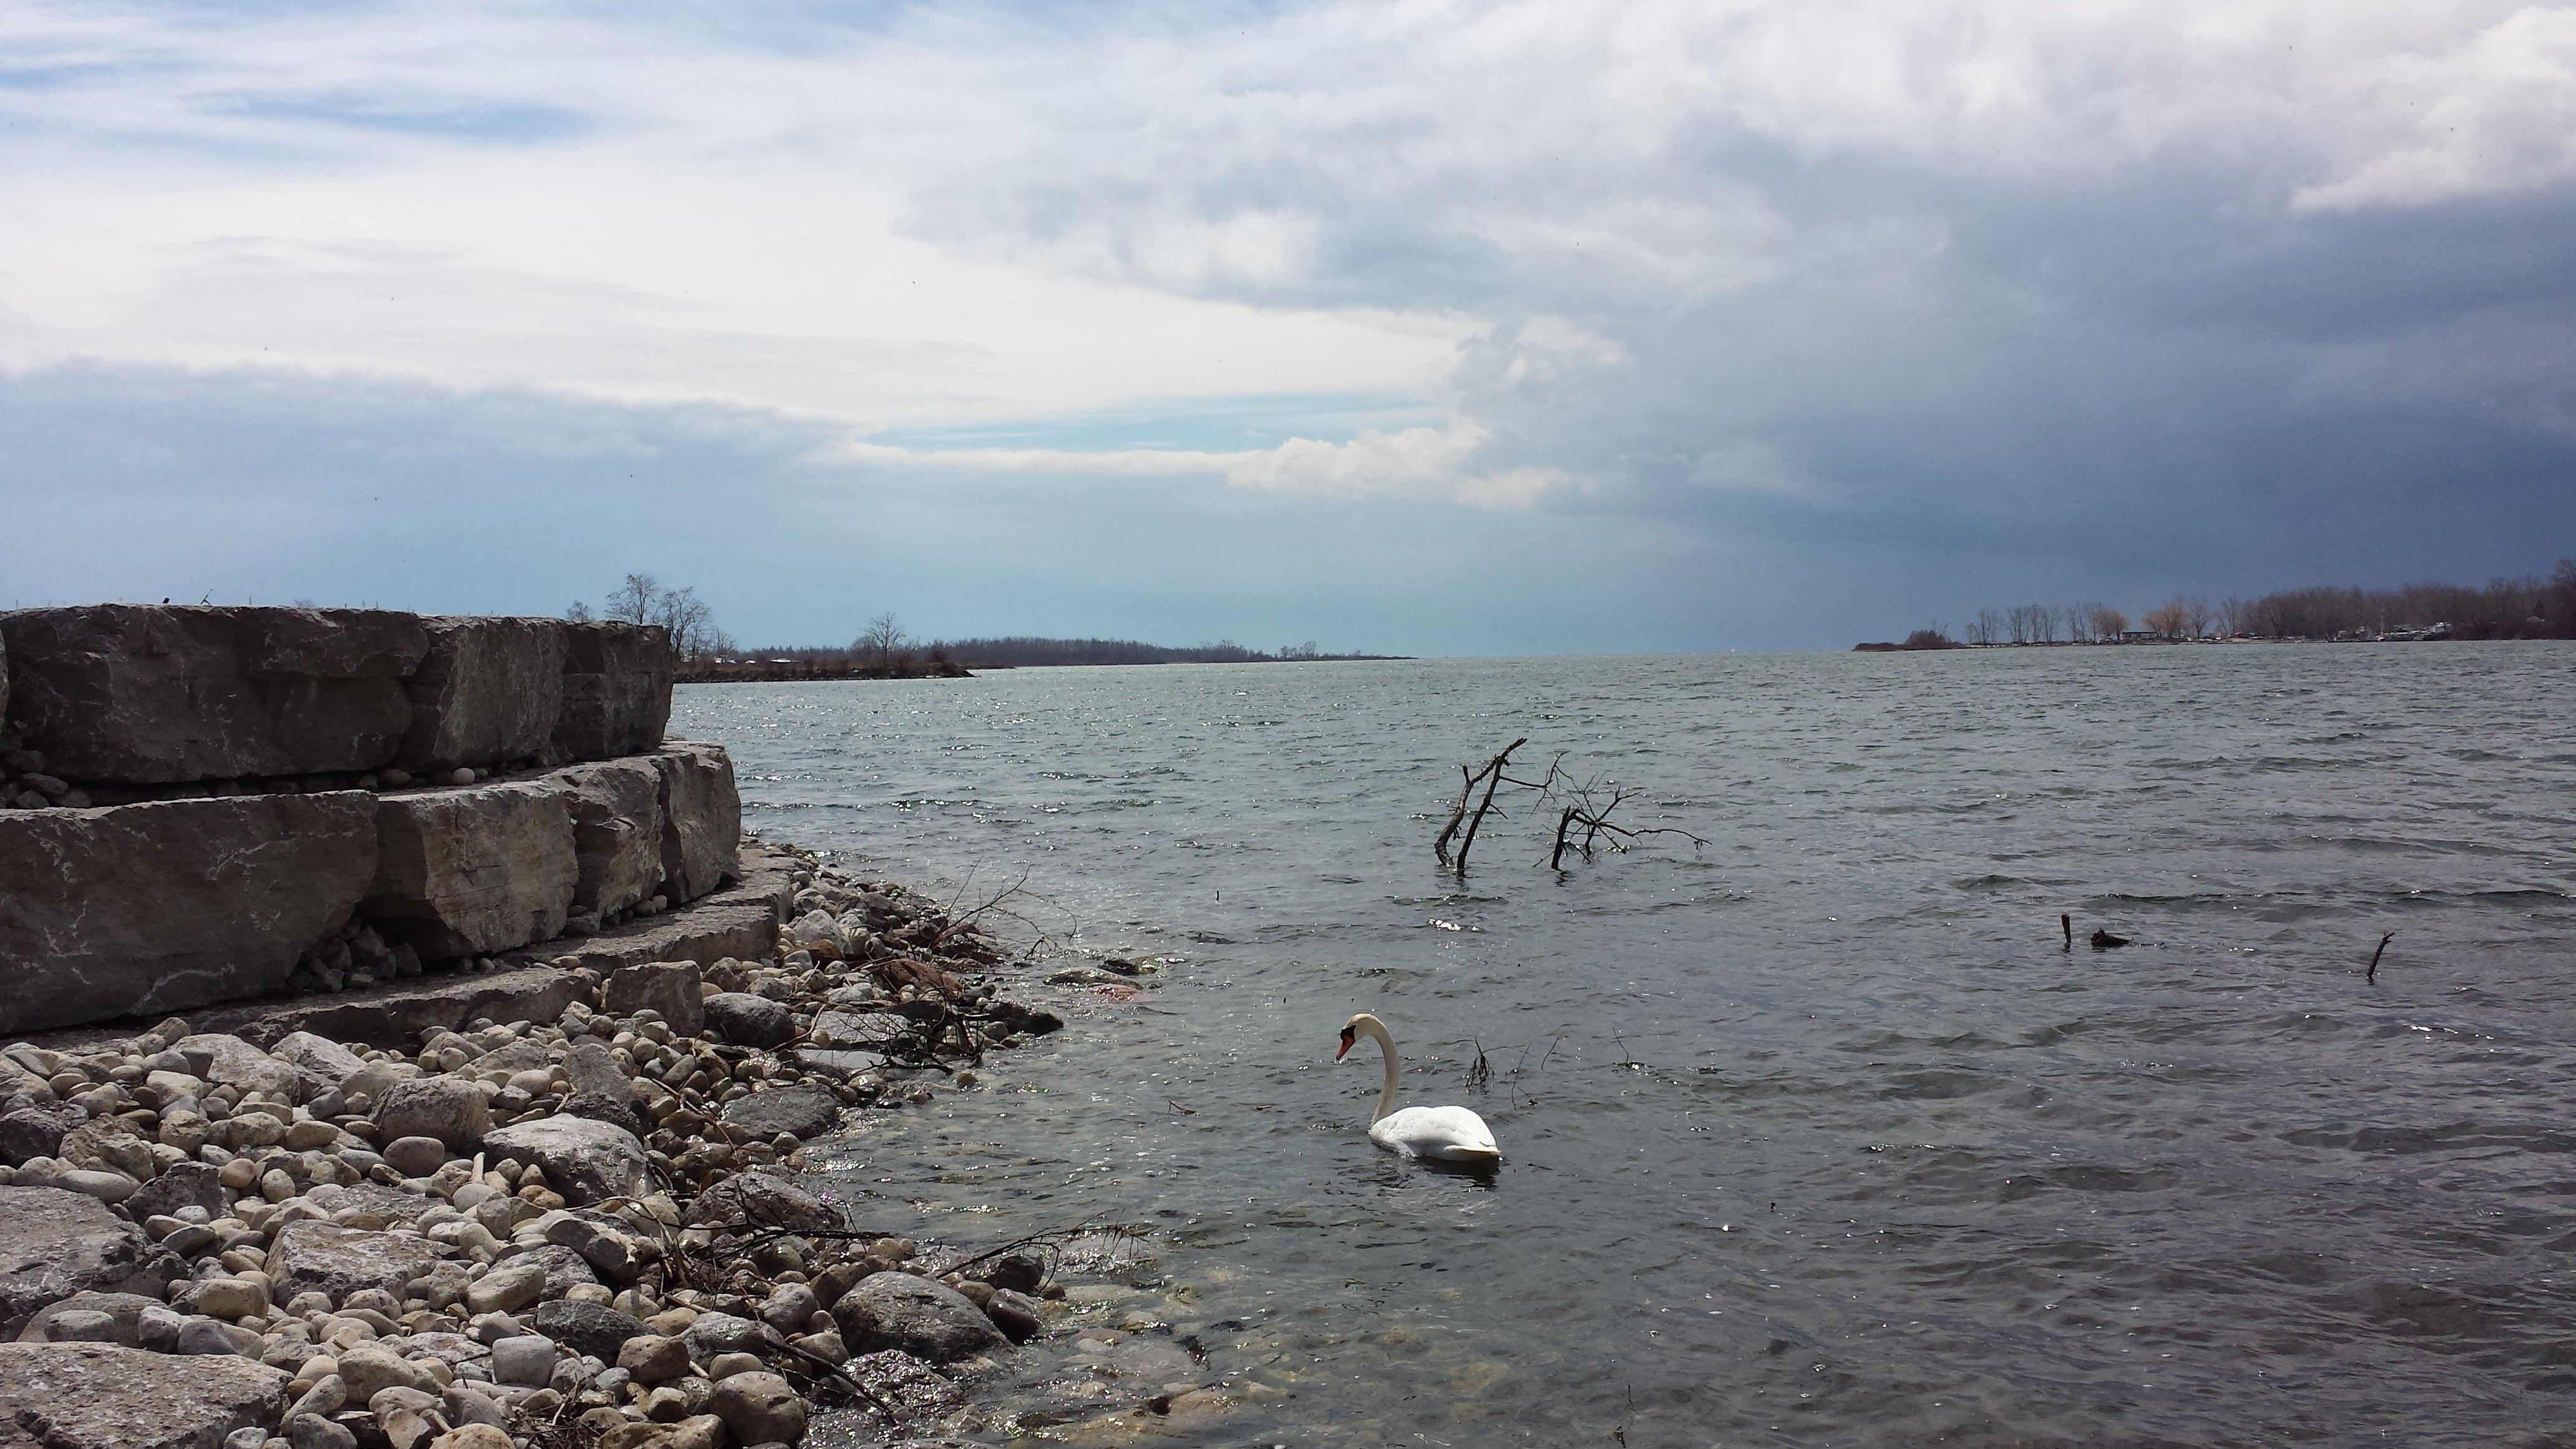 The Outer Harbour Recreational Node at the water's edge in Lake Ontario Park